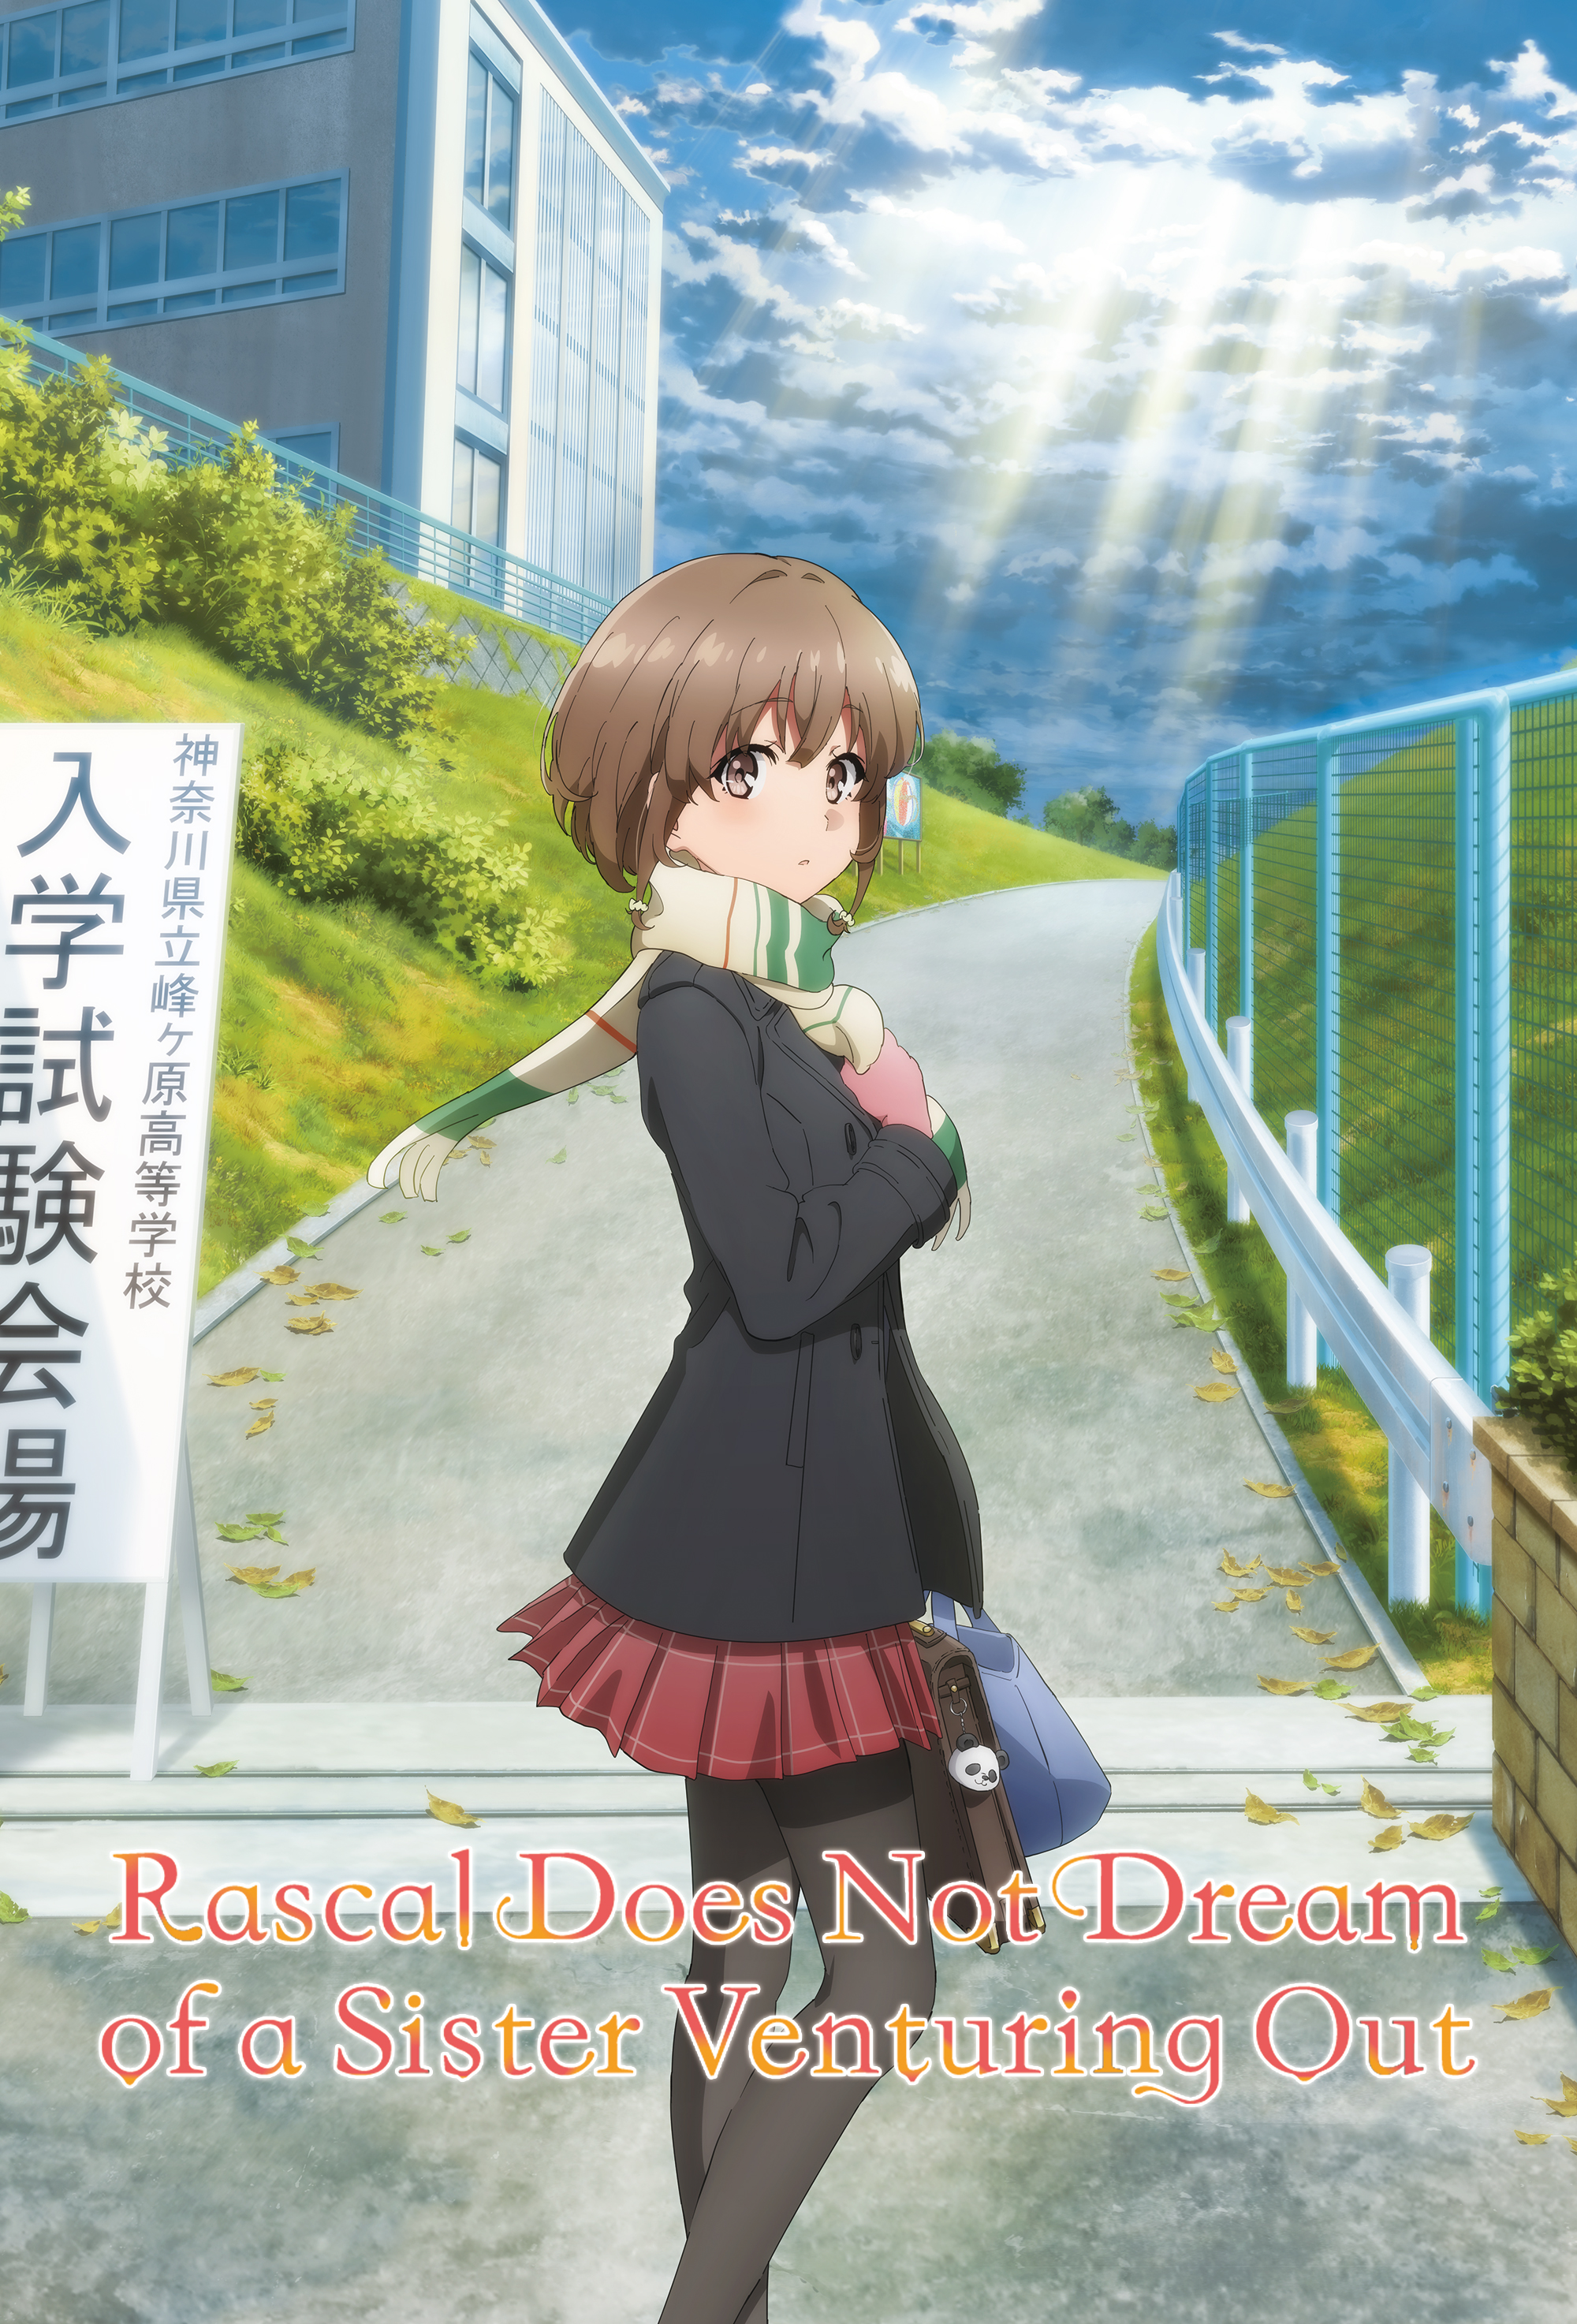 Rascal Does Not Dream of a Sister Venturing Out - Poster